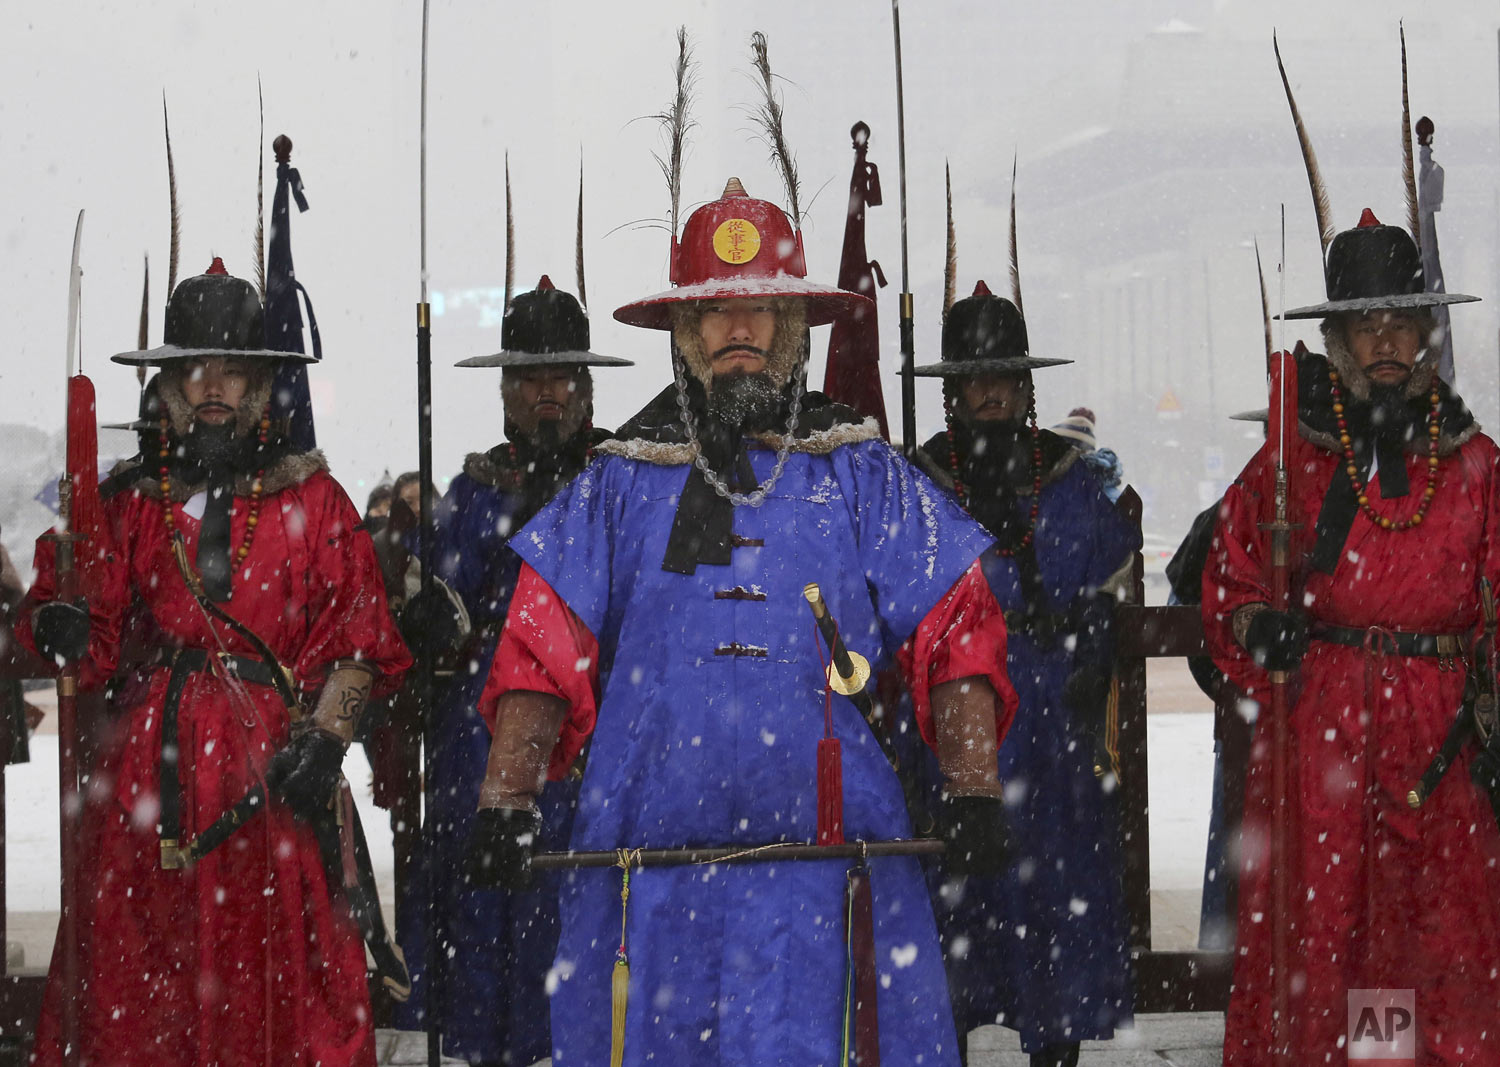  Palace guards wearing traditional military uniforms stand during snowfall at the landmark Gyeongbok Palace, the main royal palace during the Joseon Dynasty, in Seoul, South Korea, Thursday, Dec. 13, 2018. (AP Photo/Ahn Young-joon) 